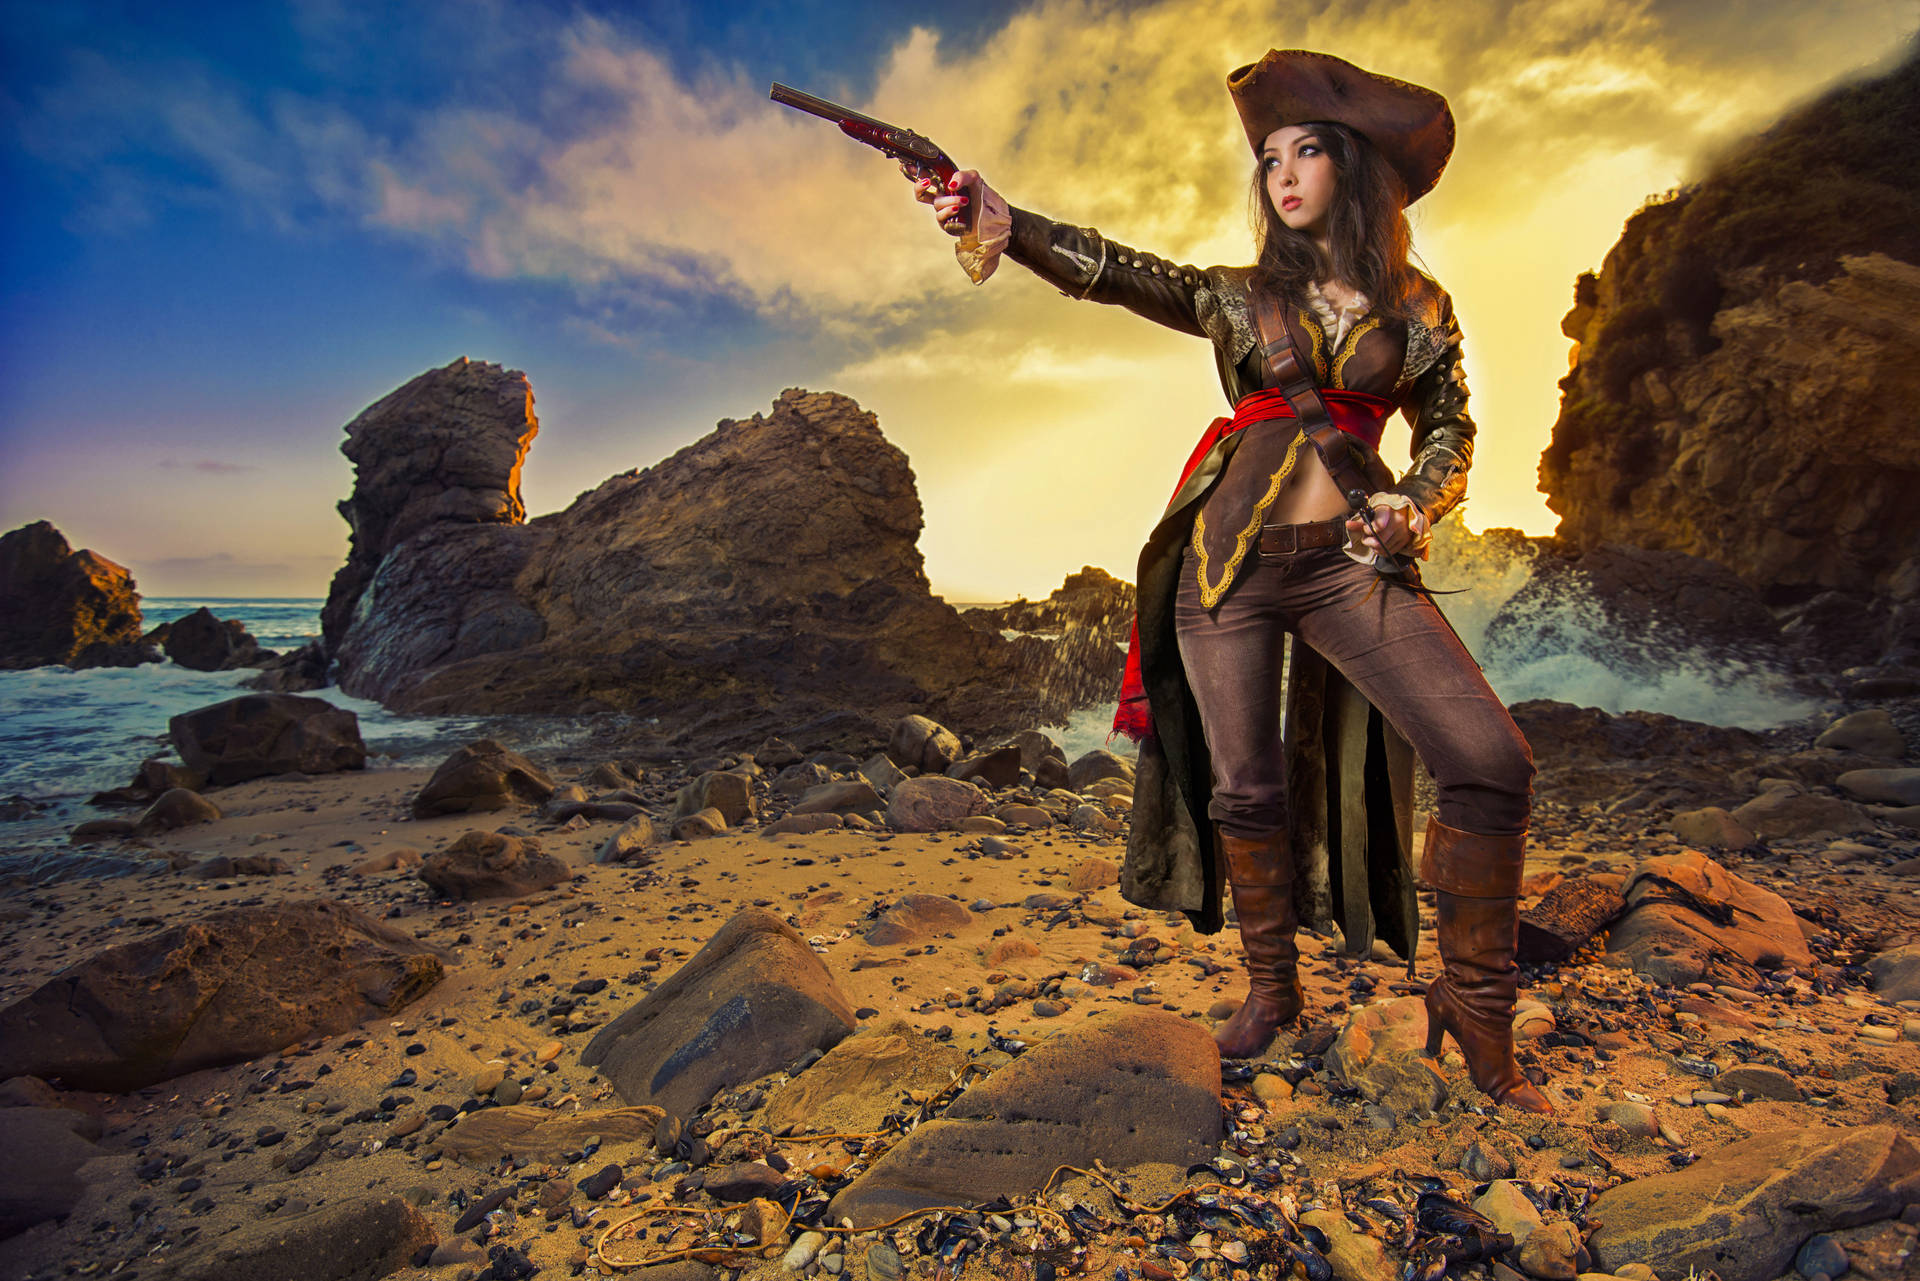 Intrepid Pirate Woman Steals the Show. Wallpaper